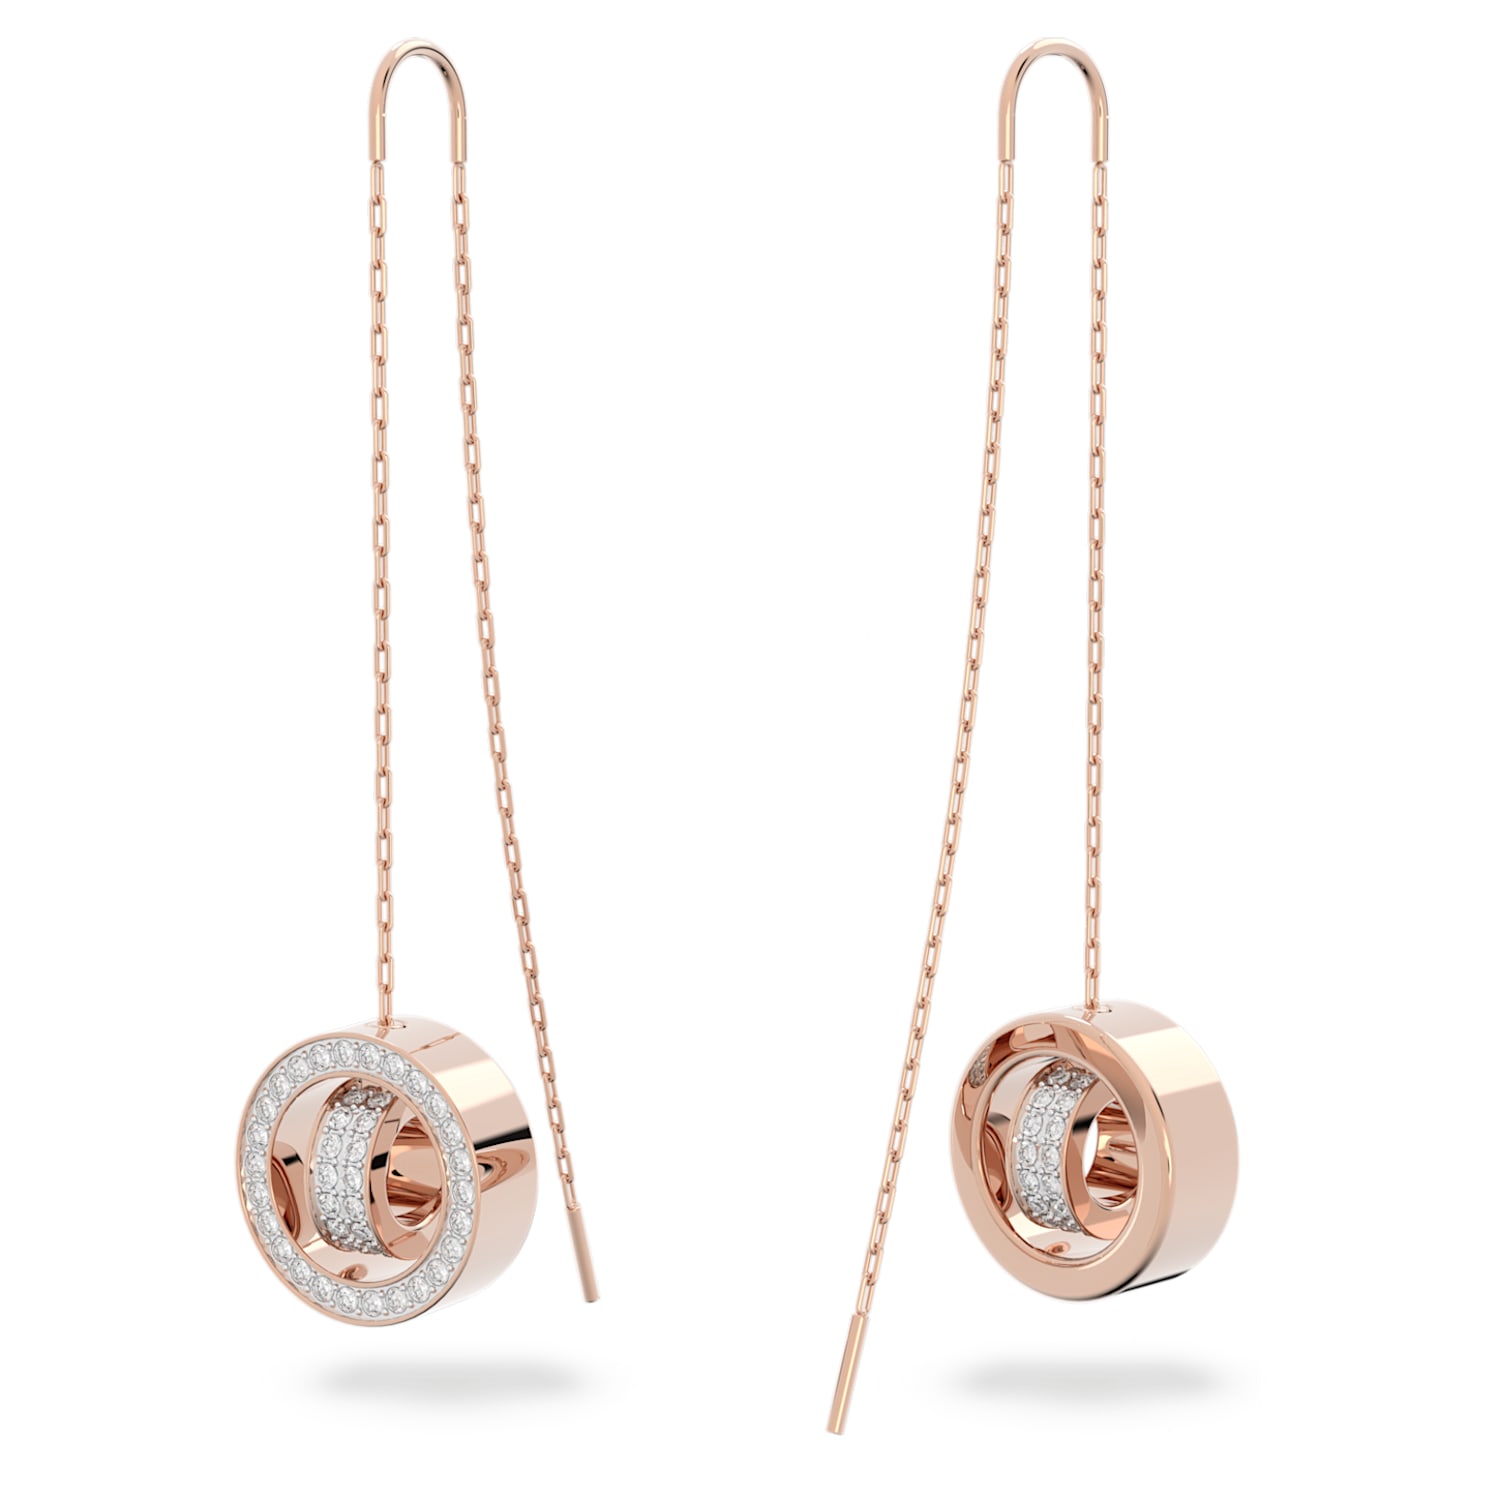 Hollow drop earrings, Long, White, Rose gold-tone plated